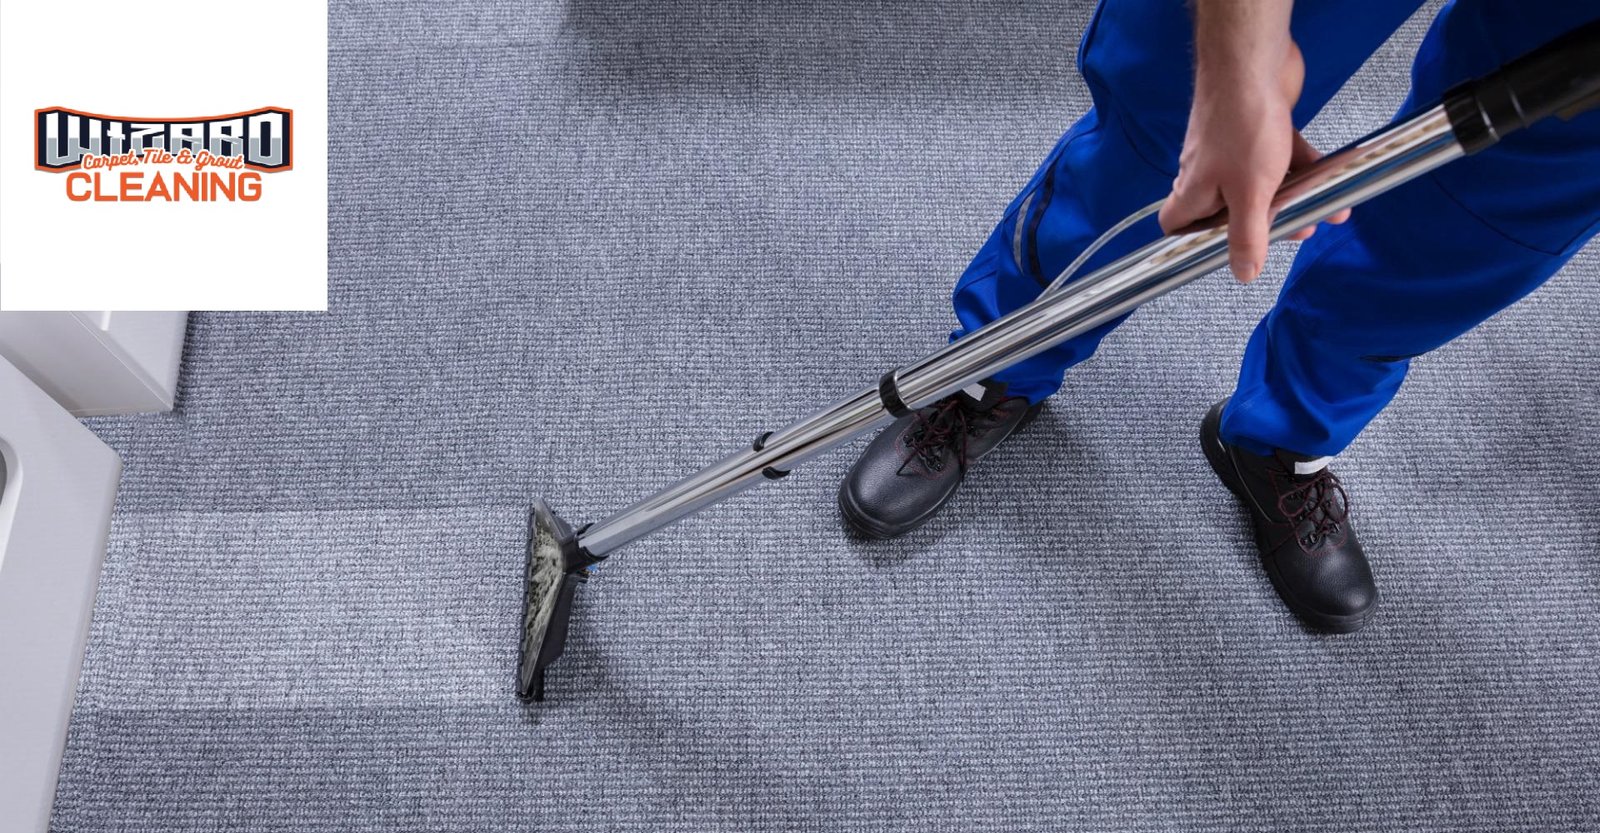 7 Benefits of Hiring a Carpet Cleaning Service